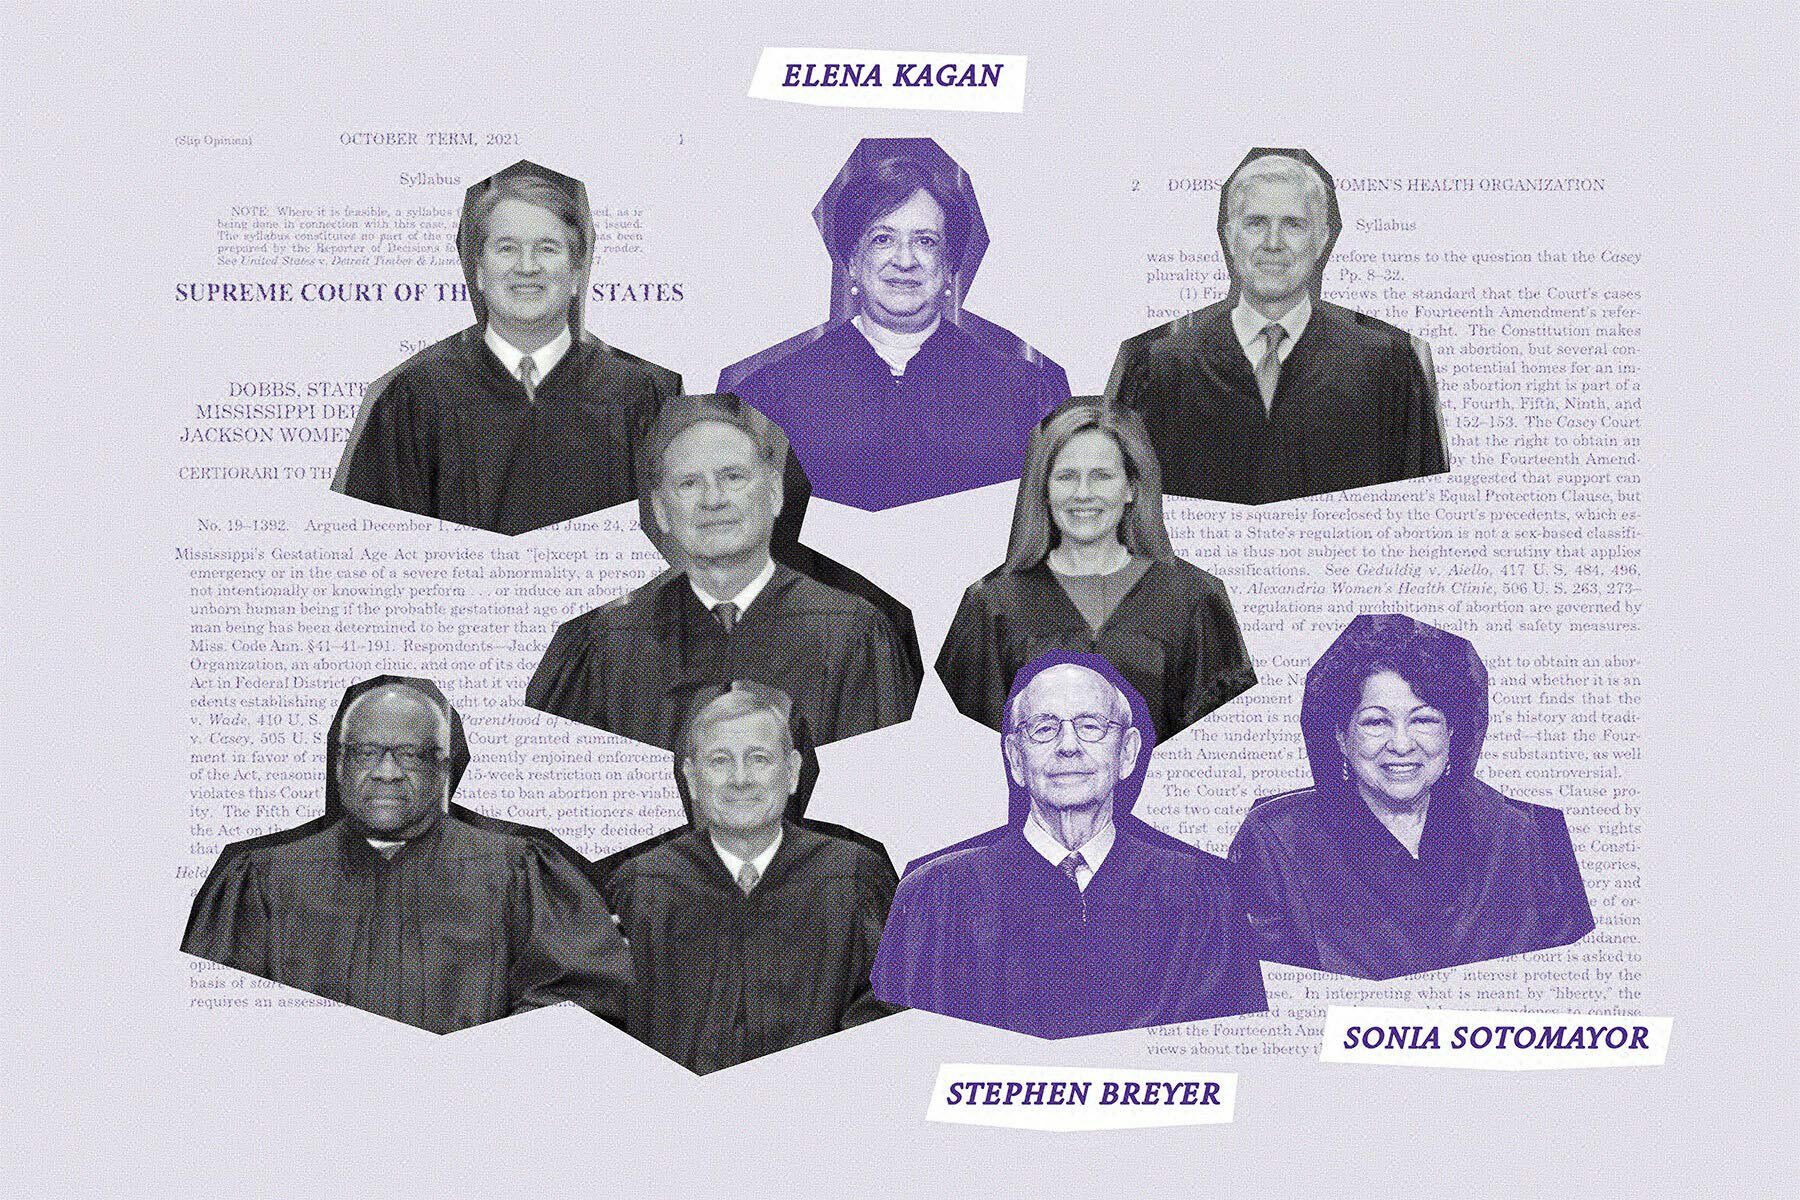 Photo illustration of Supreme Court justices with the writers of the Dobbs dissent emphasized